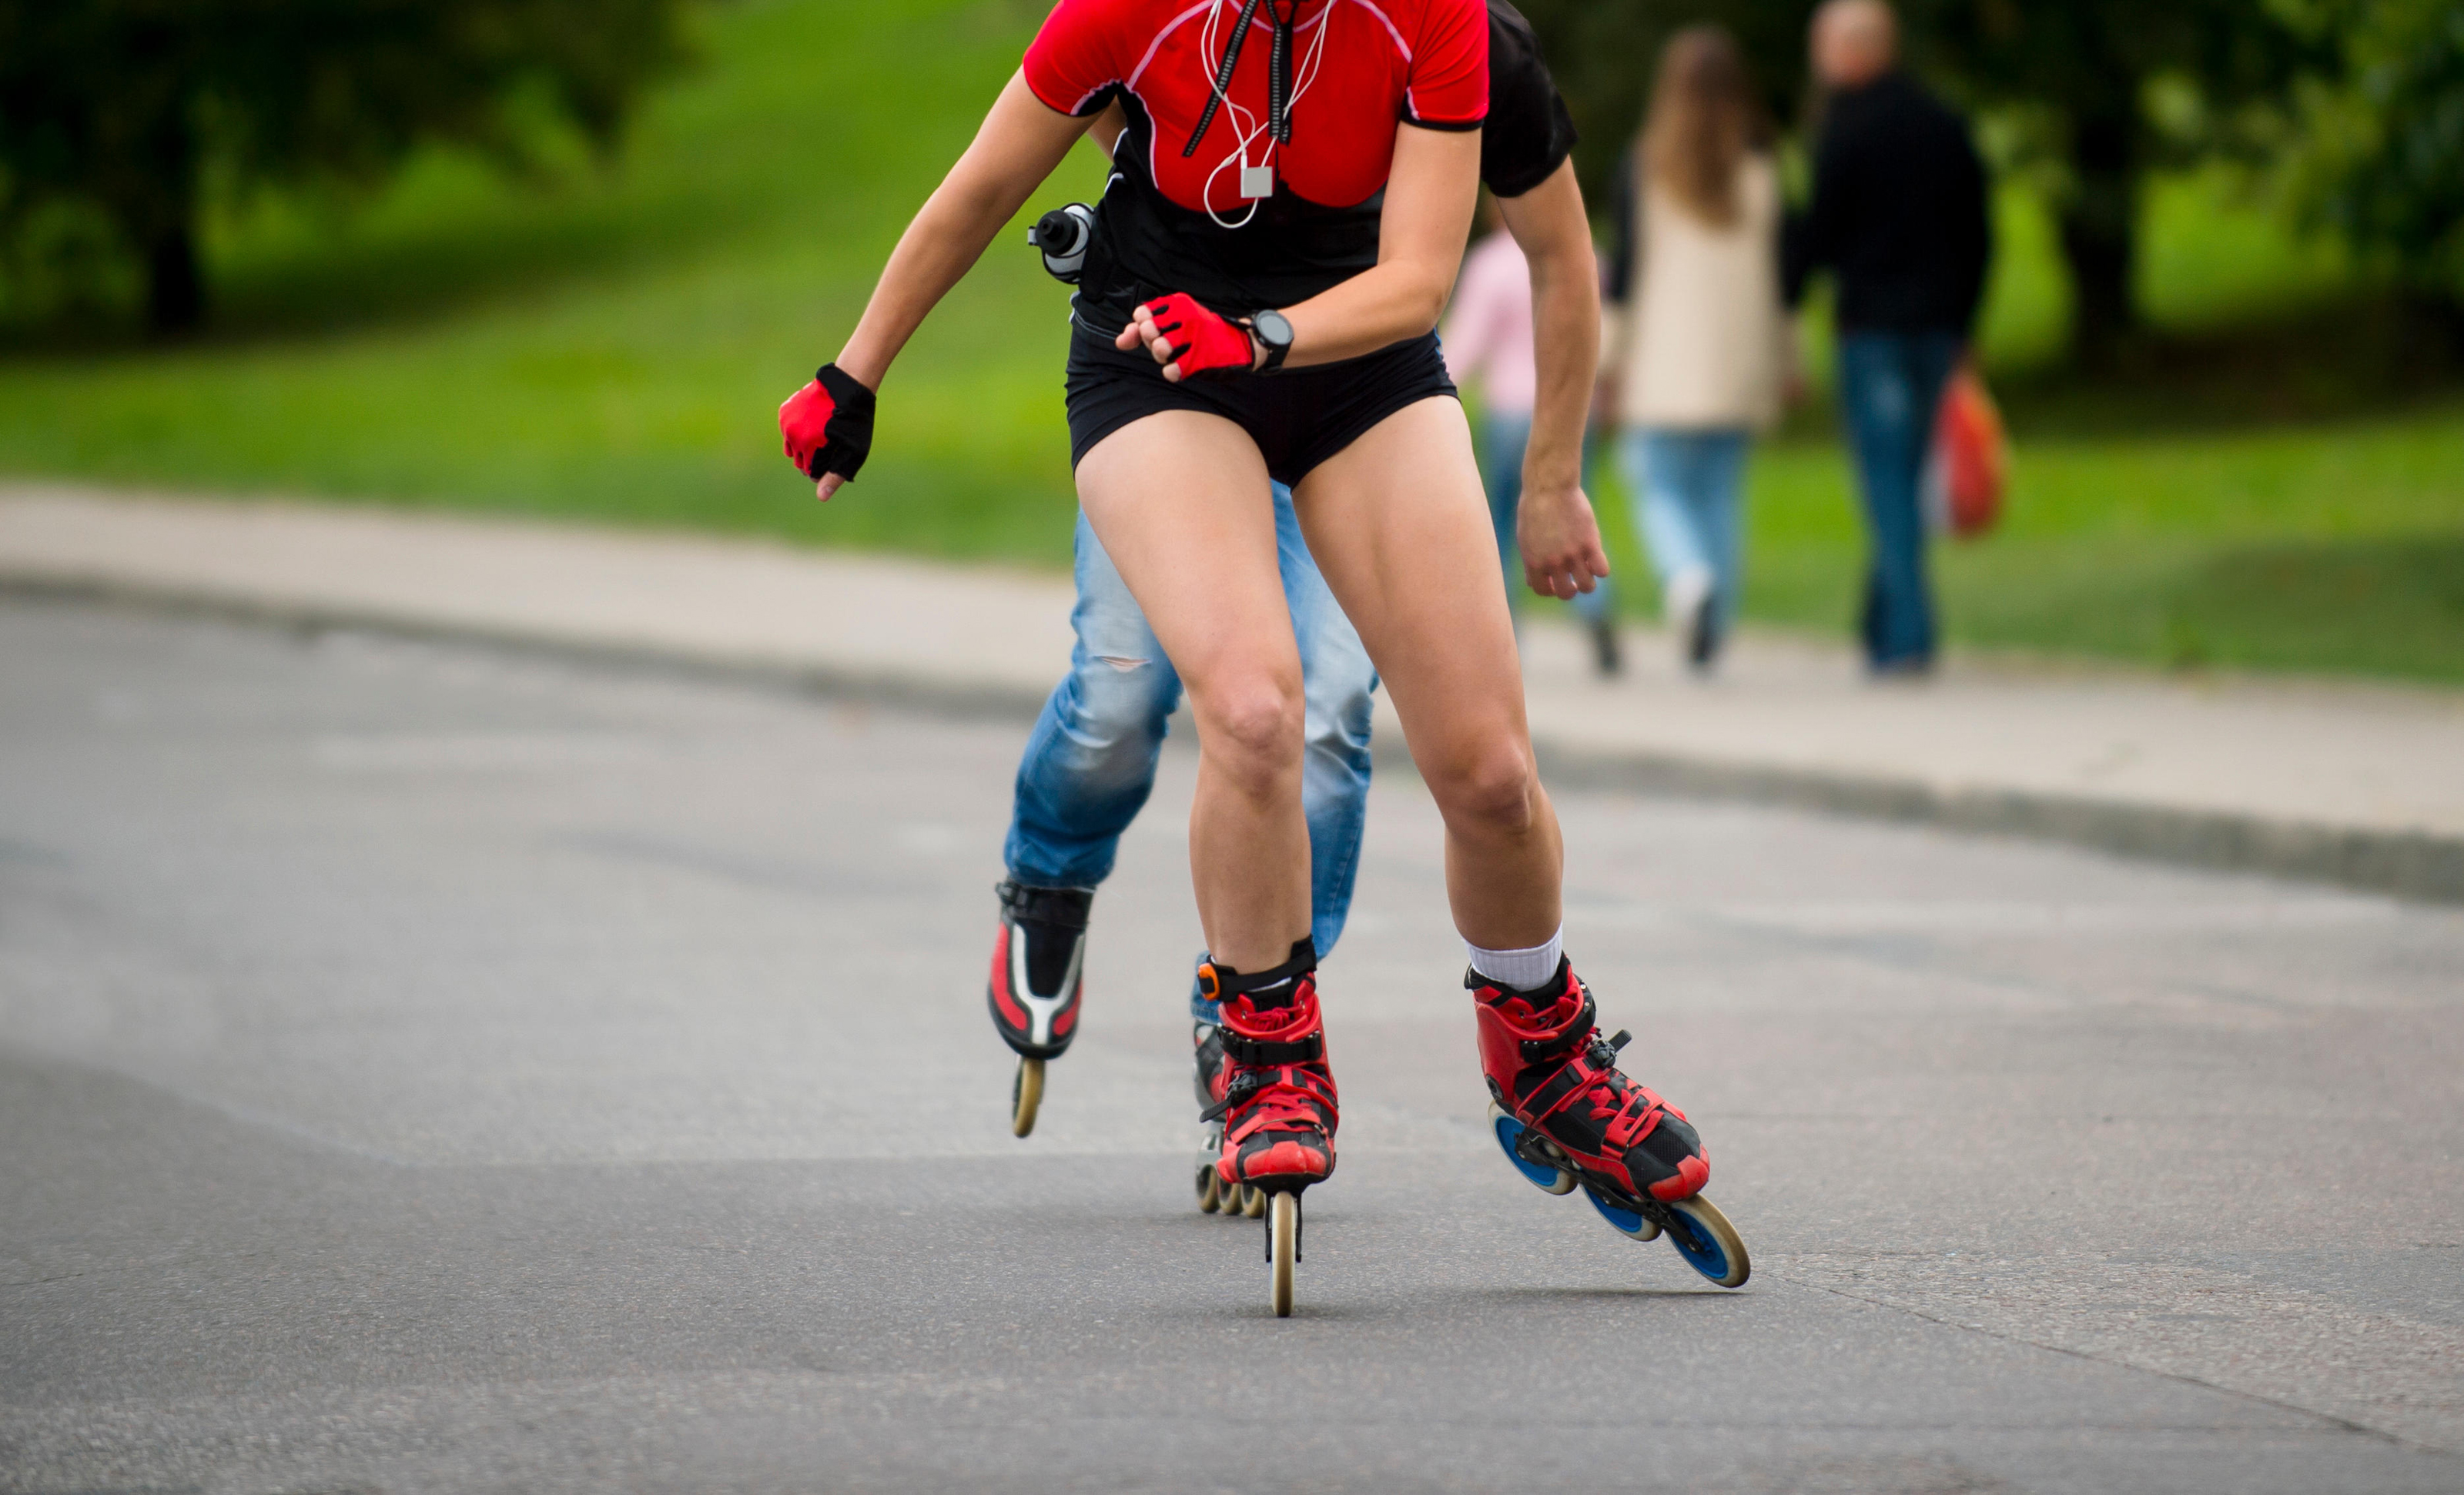 A woman inline skating